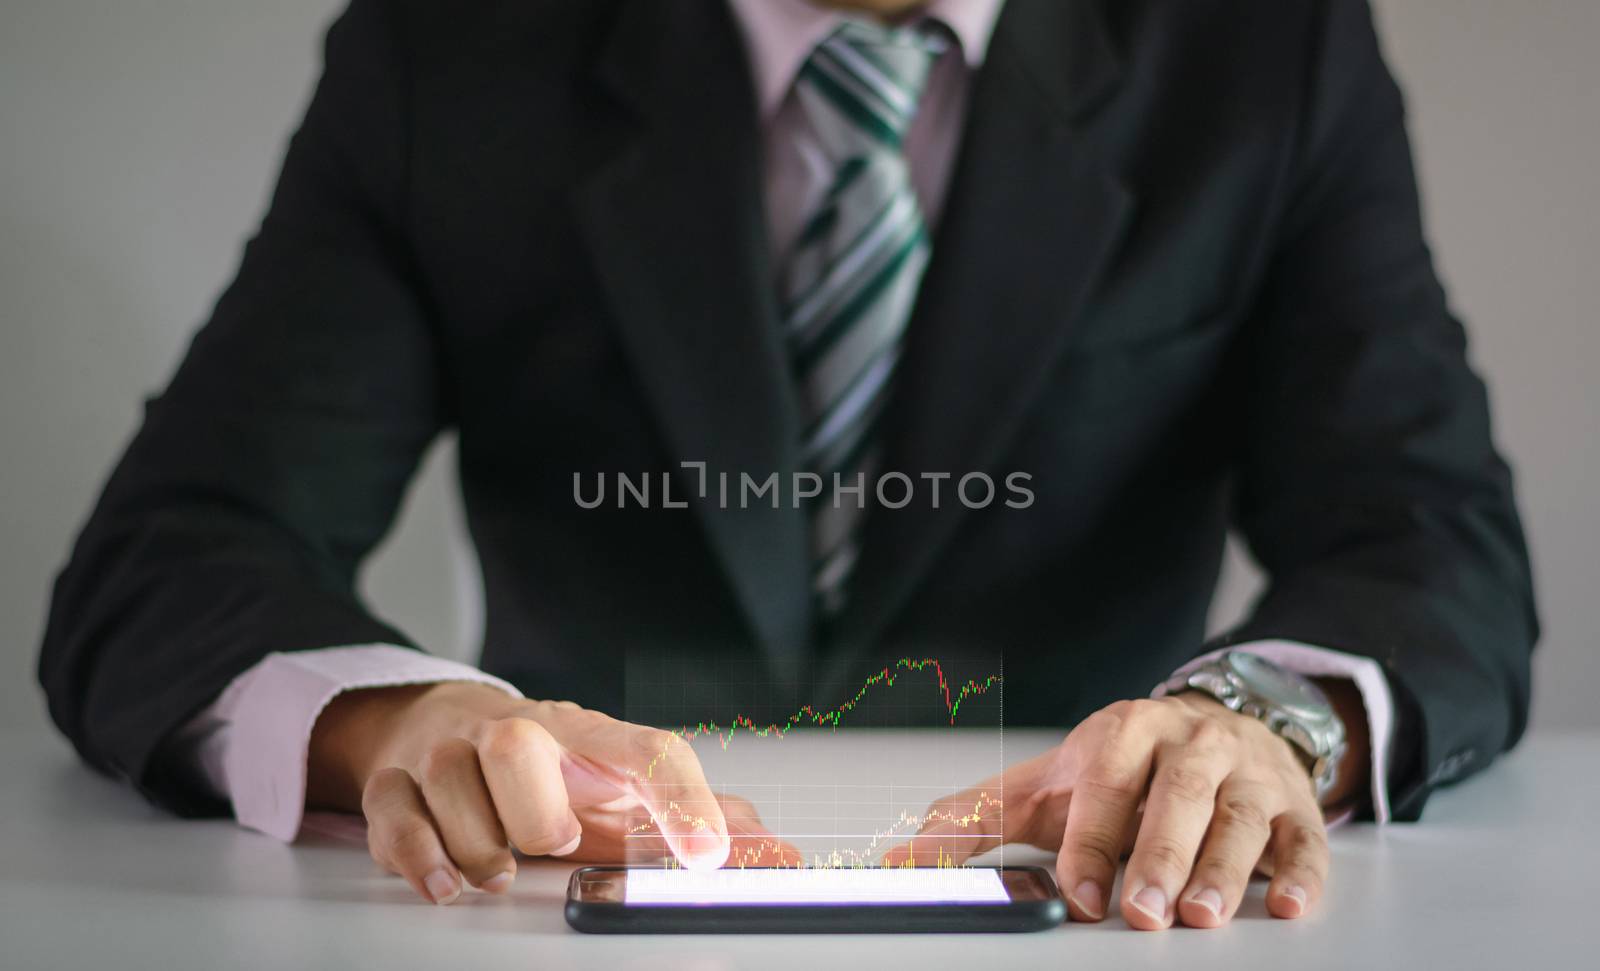 A man use checking a business graph with a hand touch screen smartphone technology
